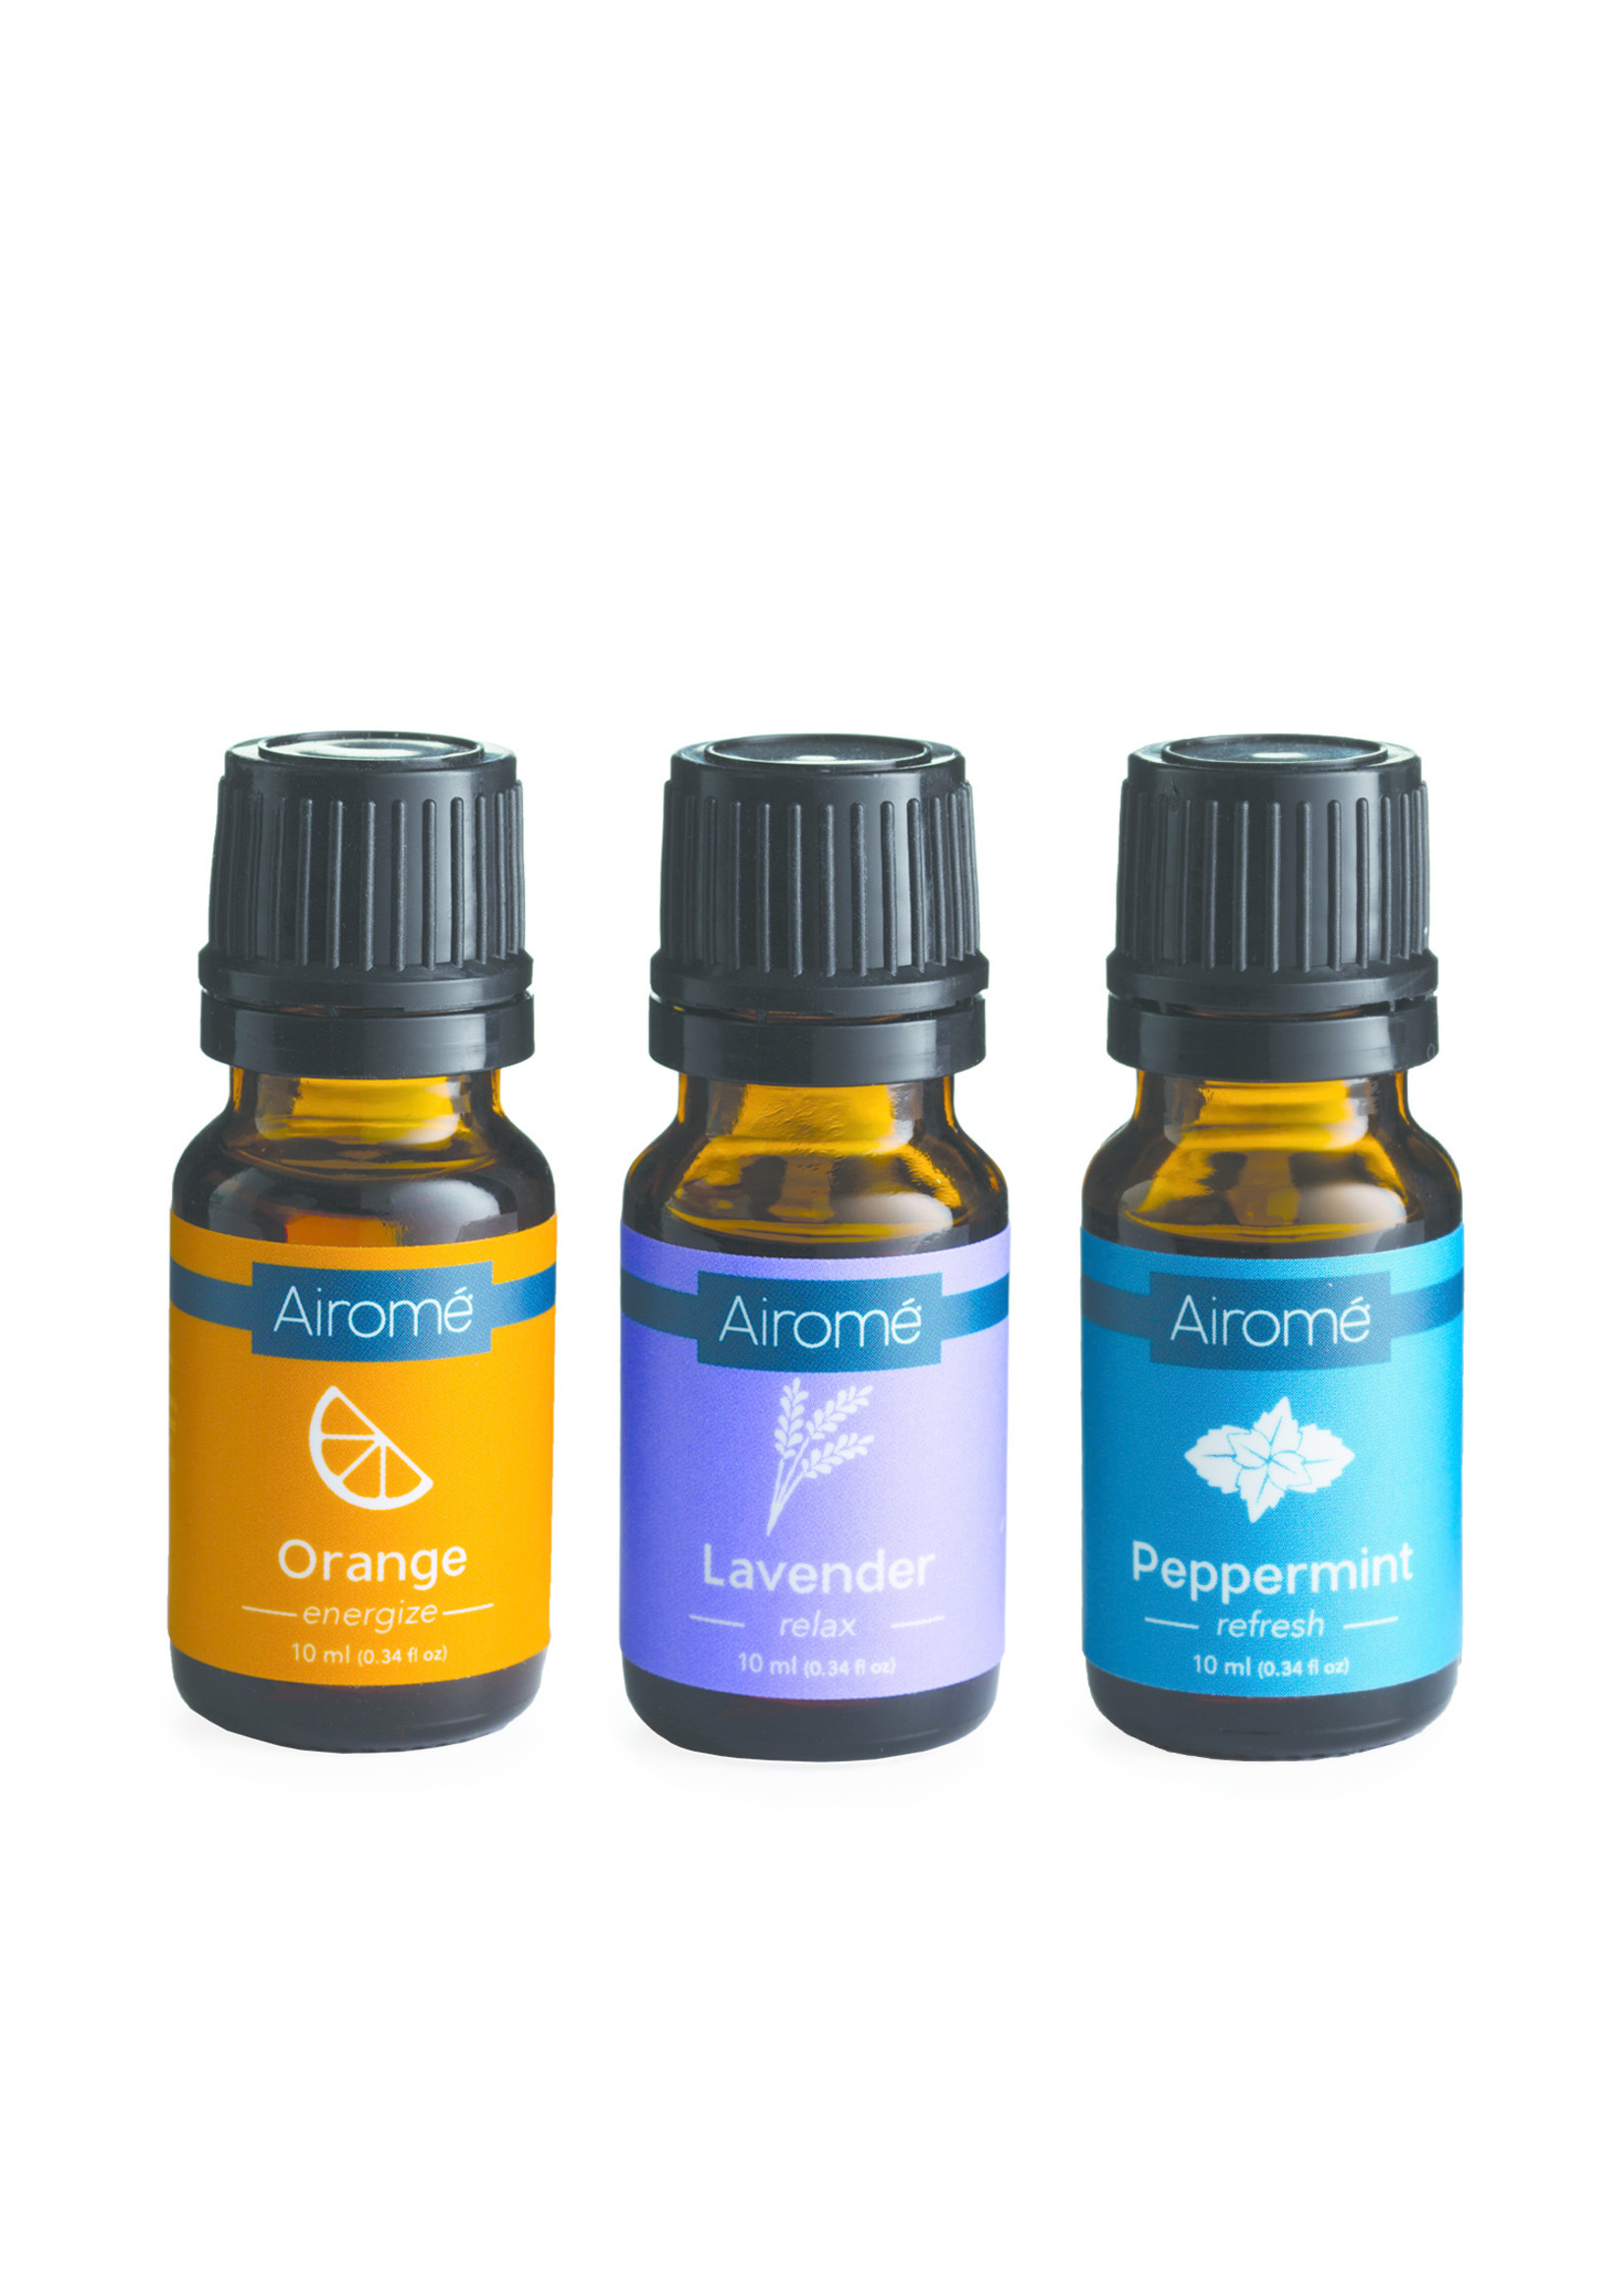 Airome Aromotherapy pack of 3 Essentials Oils 10ml each